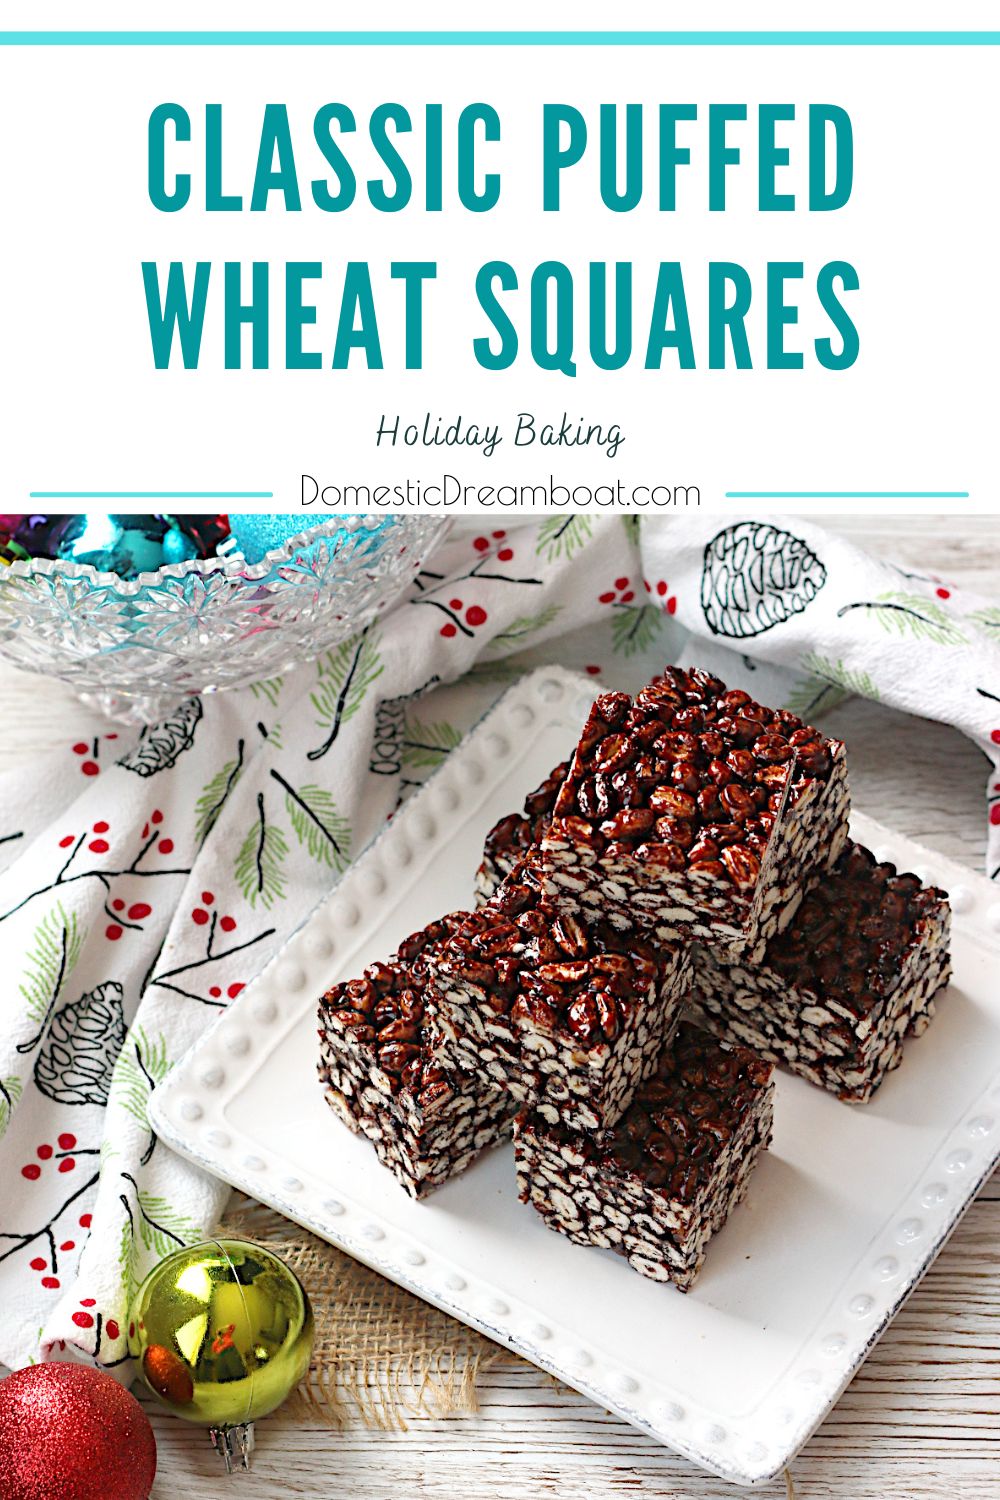 Classic Puffed Wheat Squares